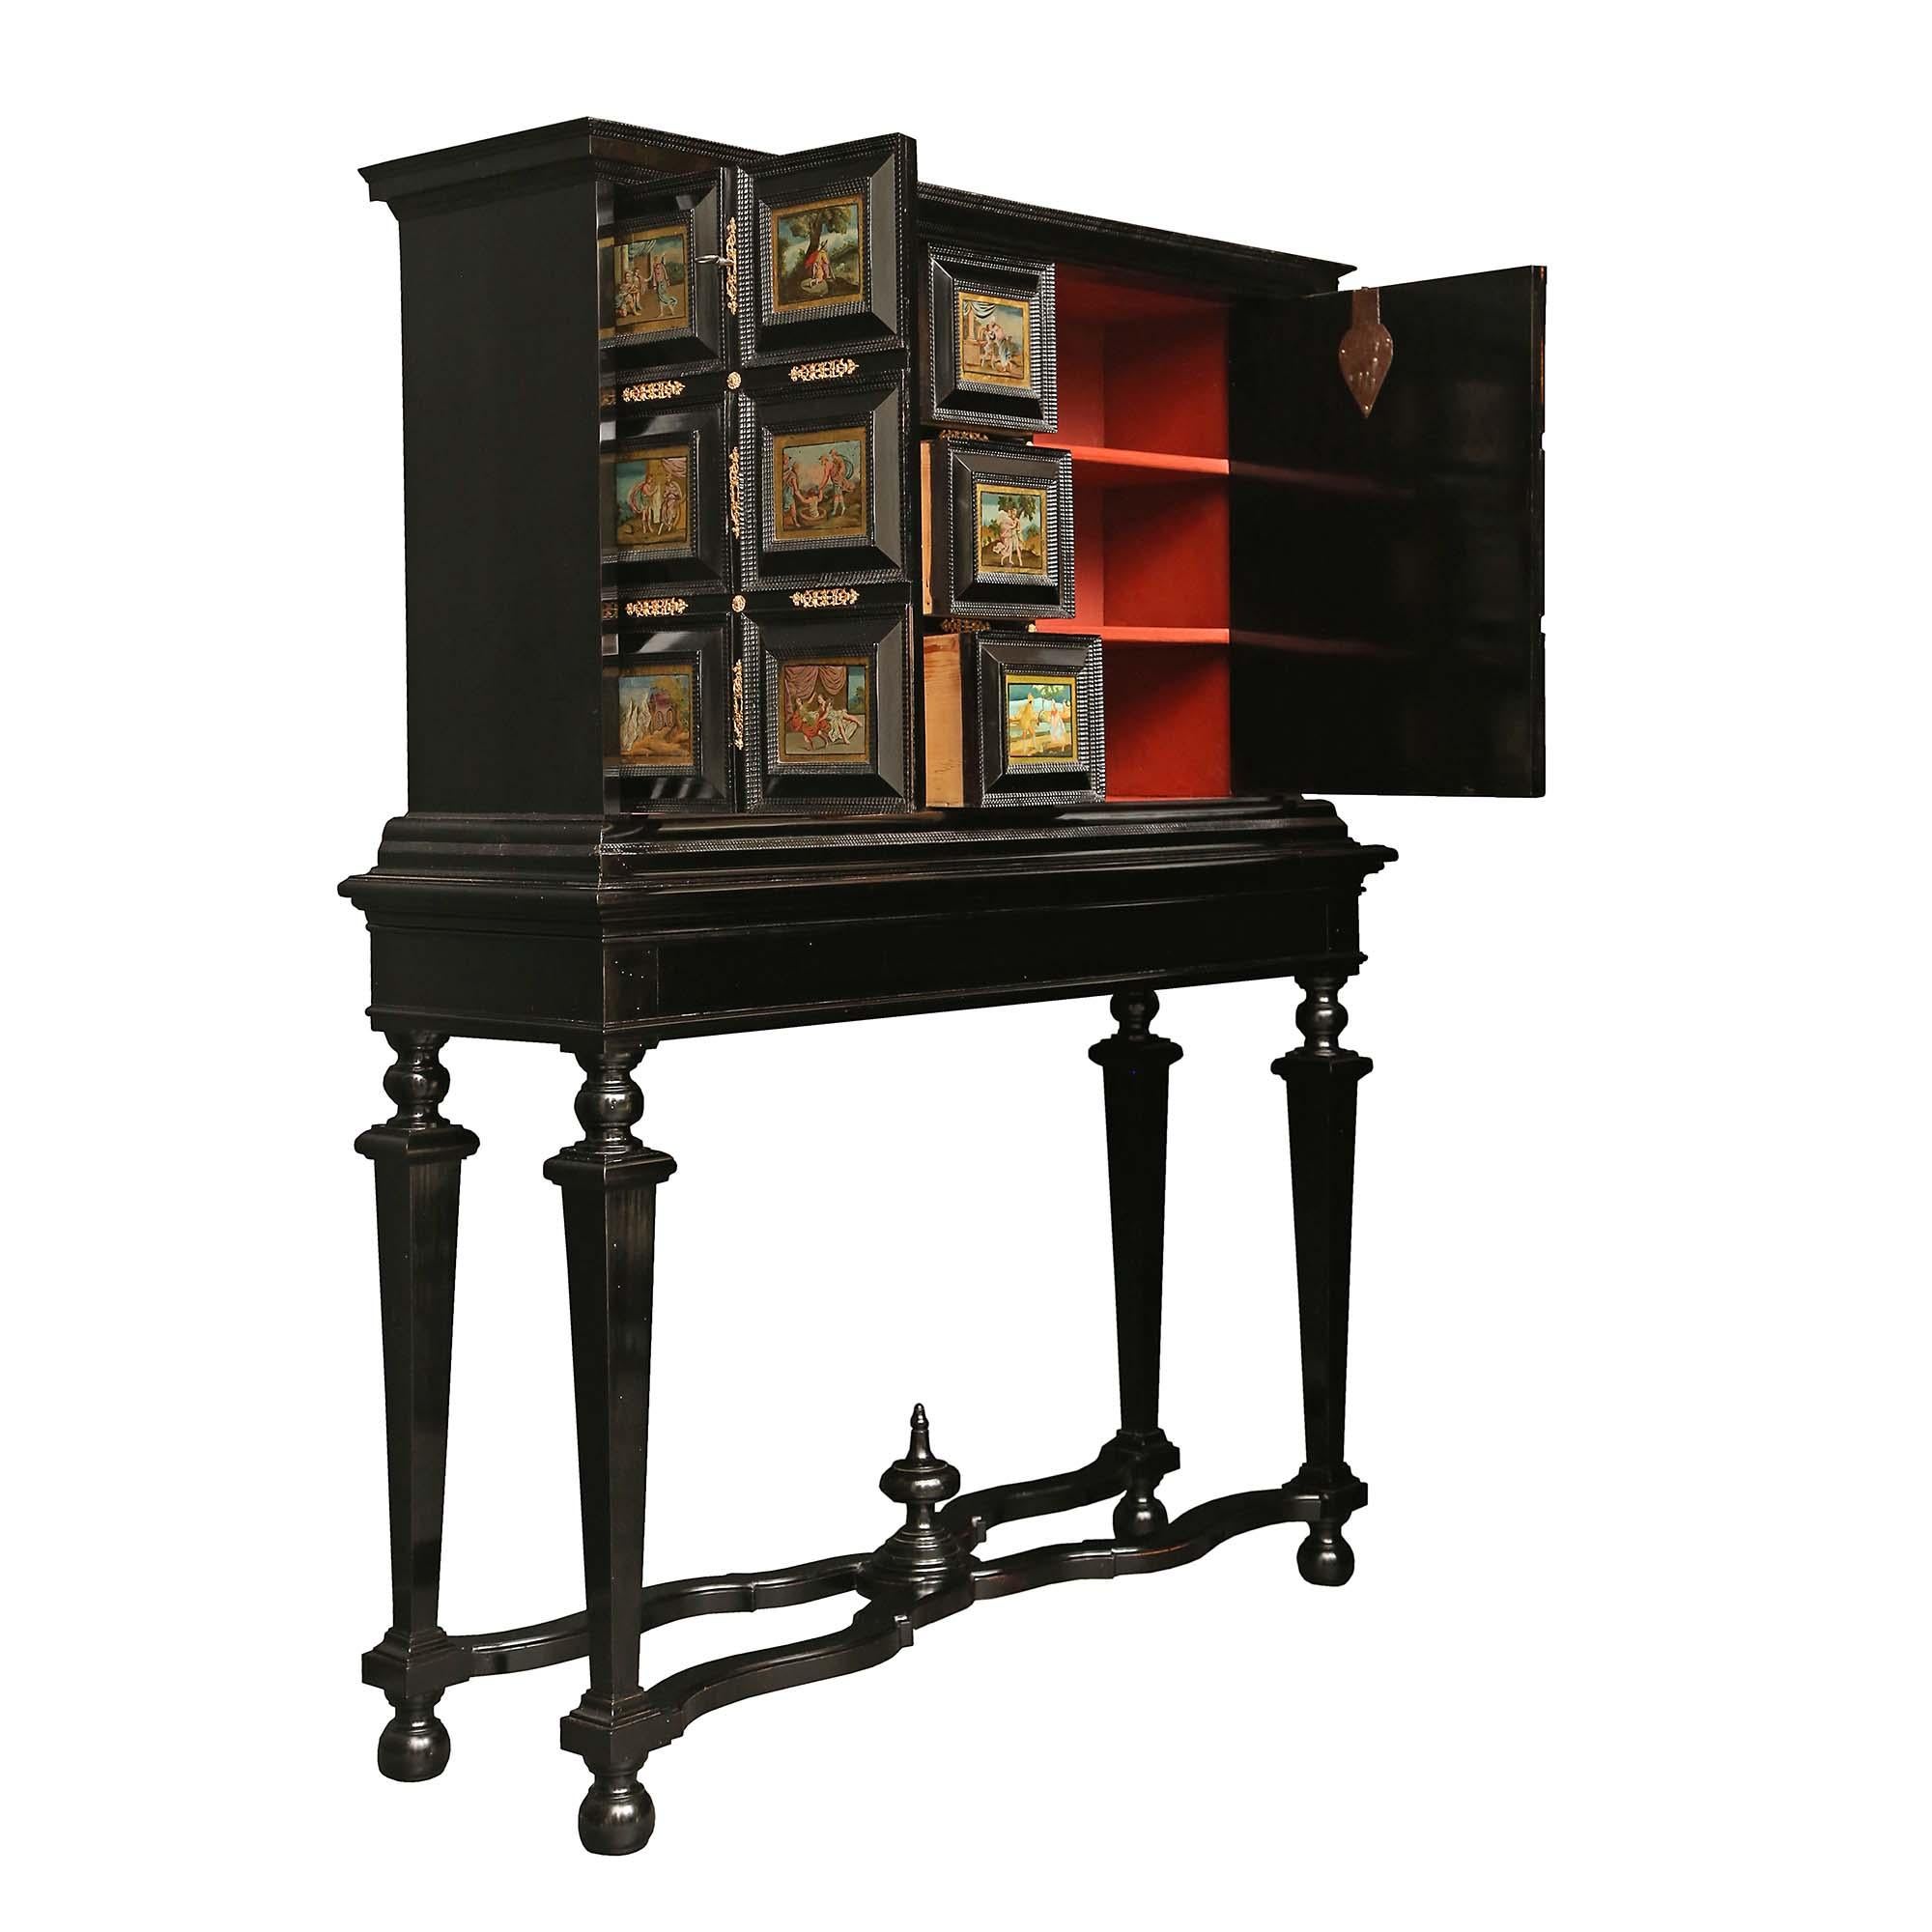 Italian 18th Century Louis XIV Period Ebony and Reverse Painted Glass Cabinet In Good Condition For Sale In West Palm Beach, FL